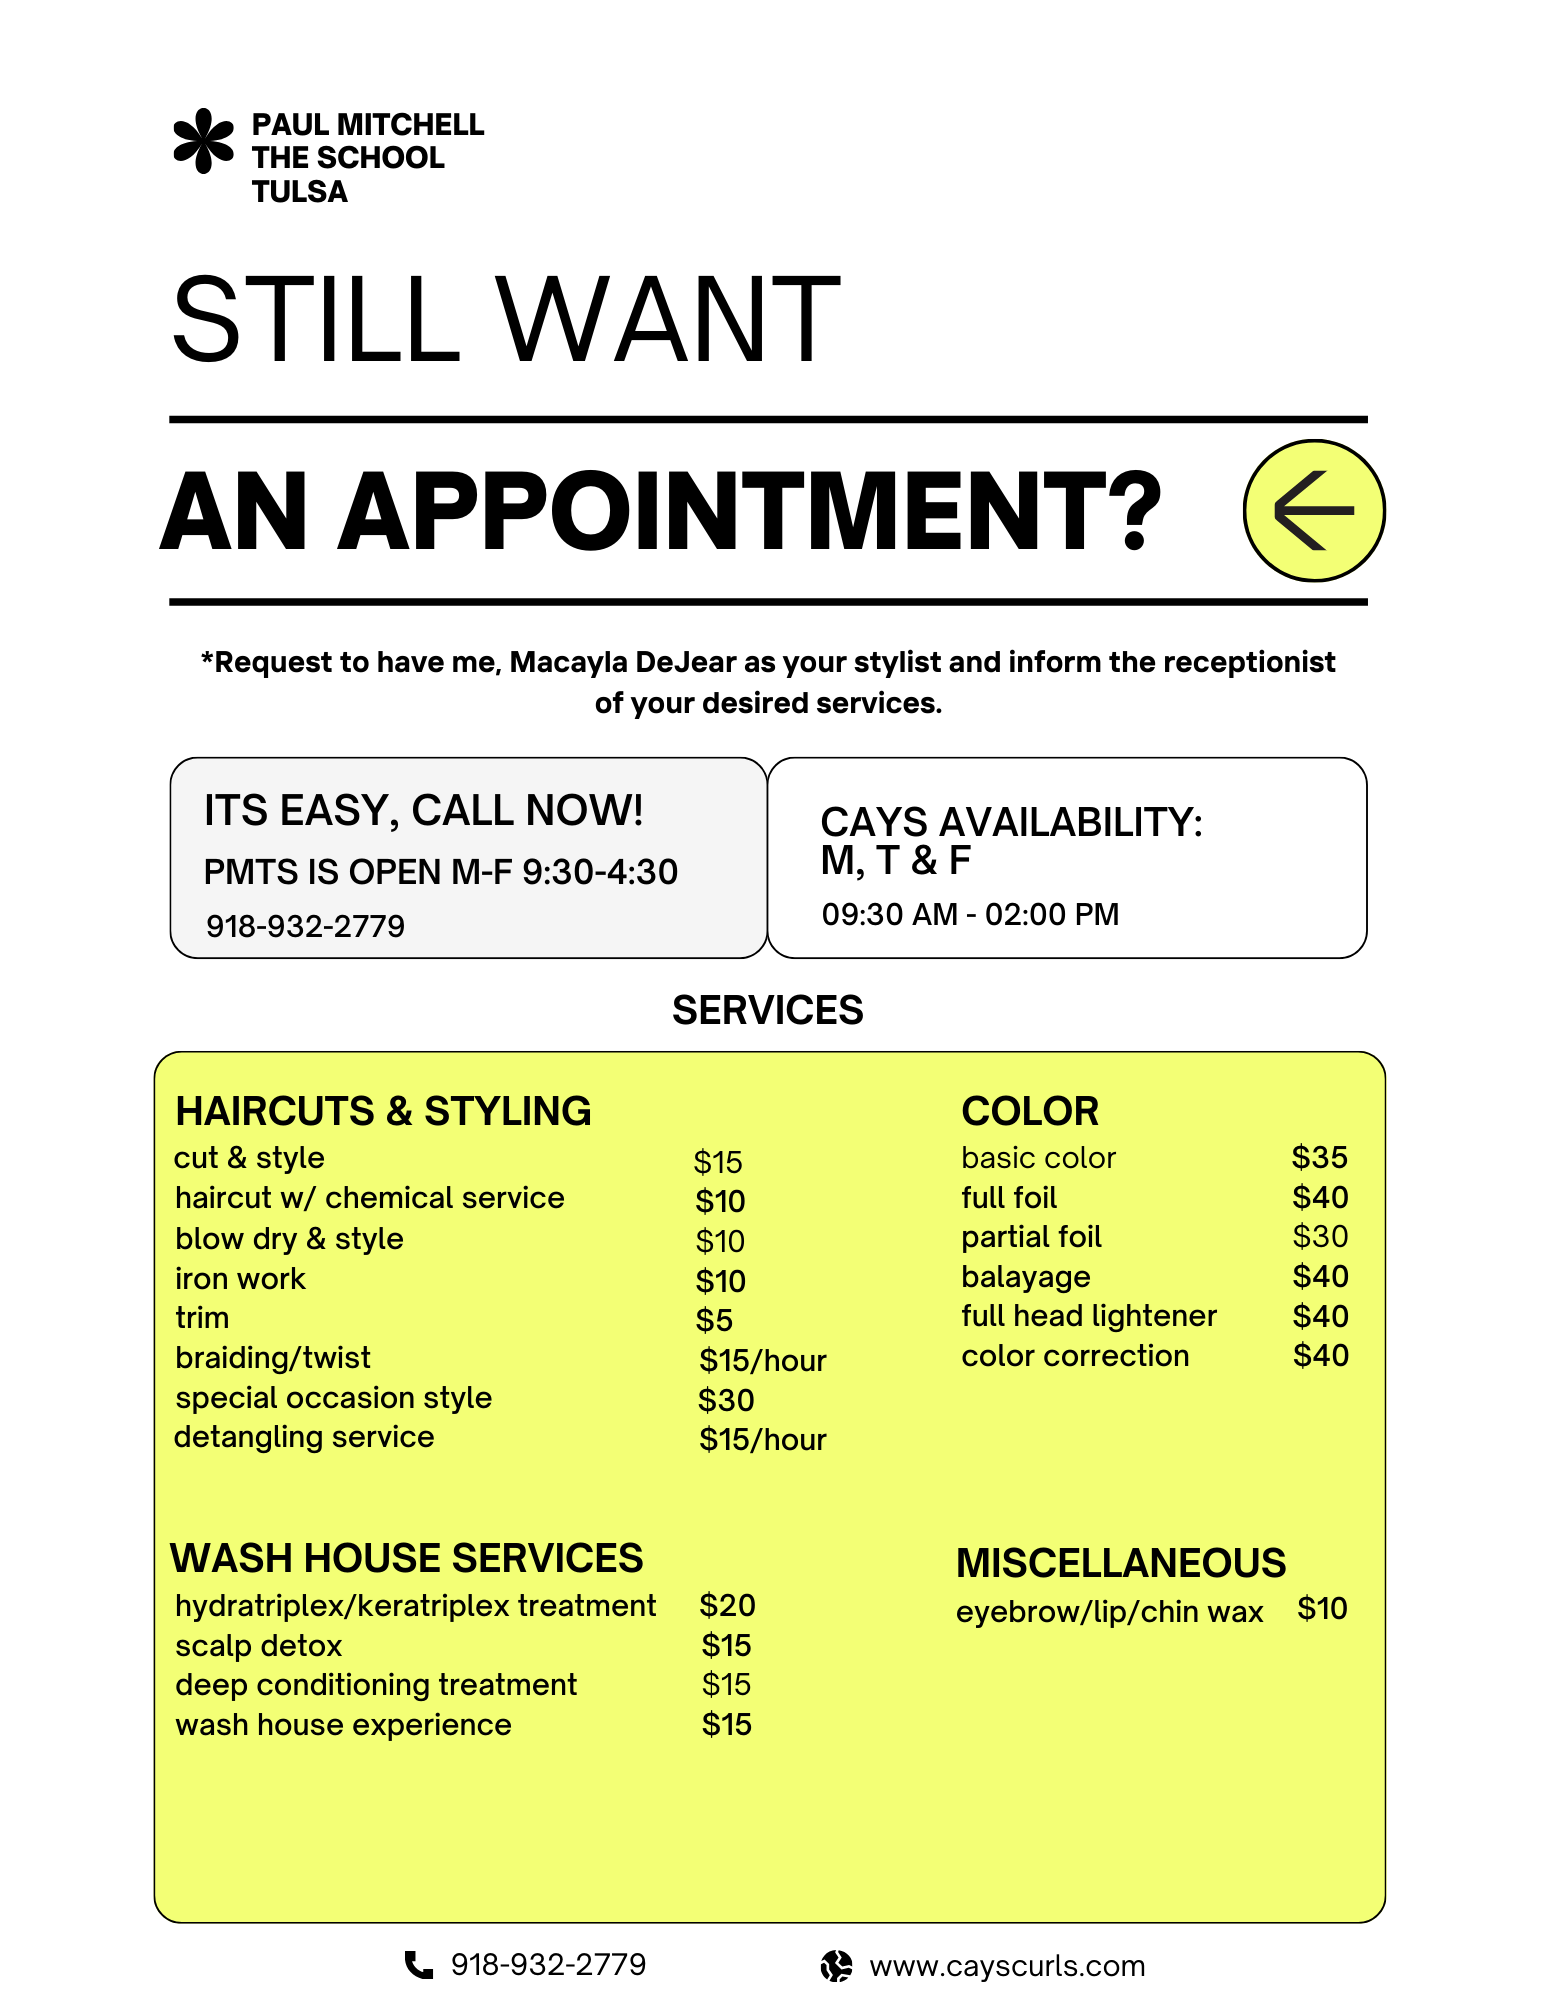 As a student at Paul Mitchell, my services are offered at a super low rate! Hurry & take advantage of these services while you can! These prices wont last long!